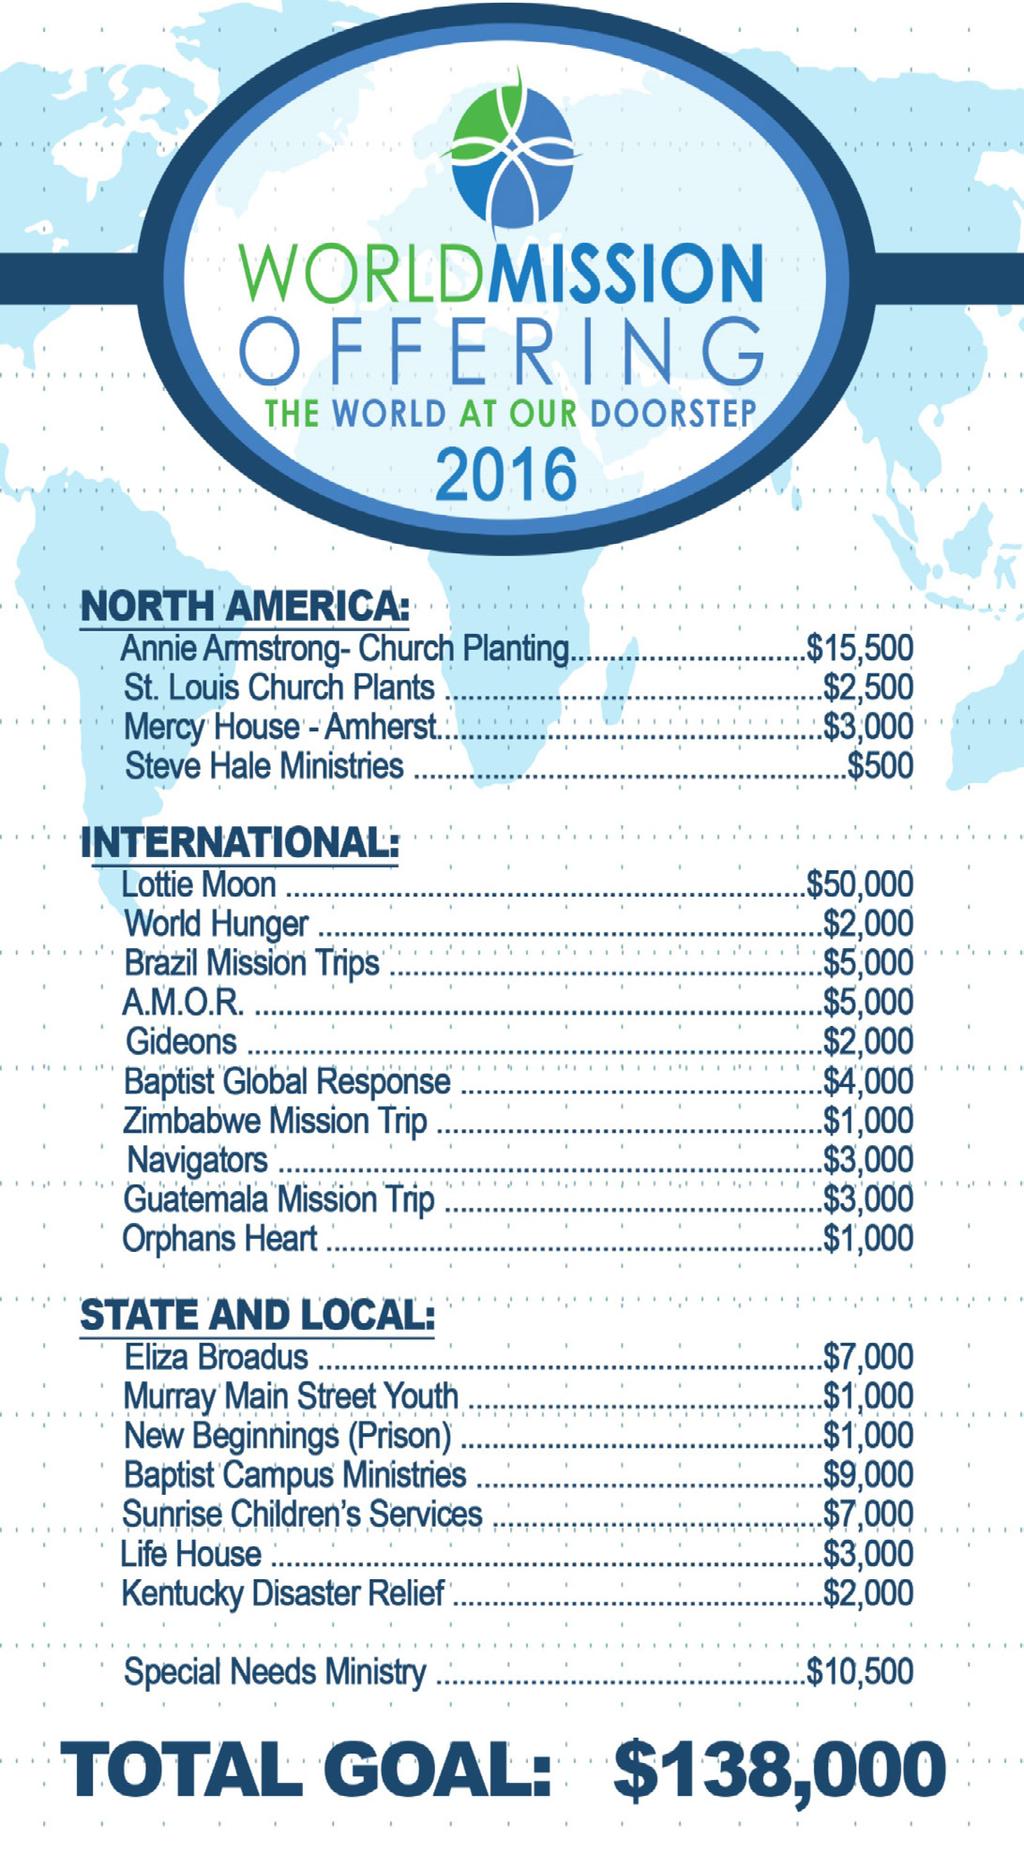 Our World Mission Offering Goal for 2016 is $138,000.